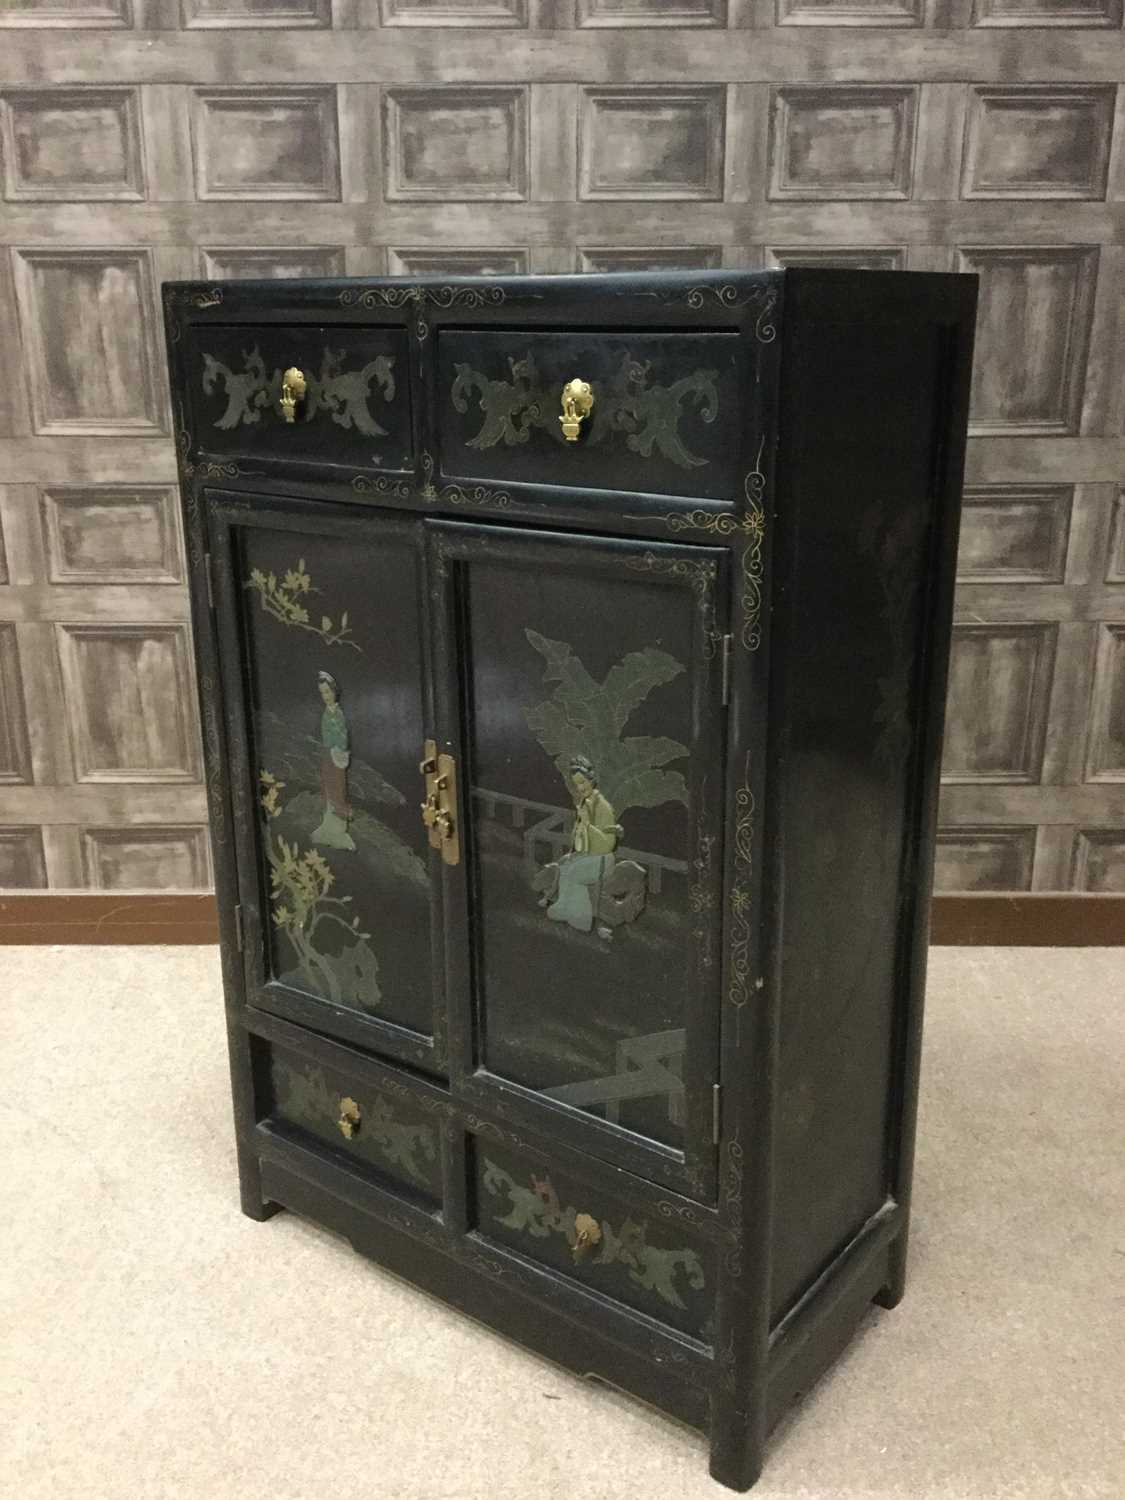 Lot 735 - AN EARLY 20TH CENTURY CHINESE PAINTED AND LACQUERED CABINET